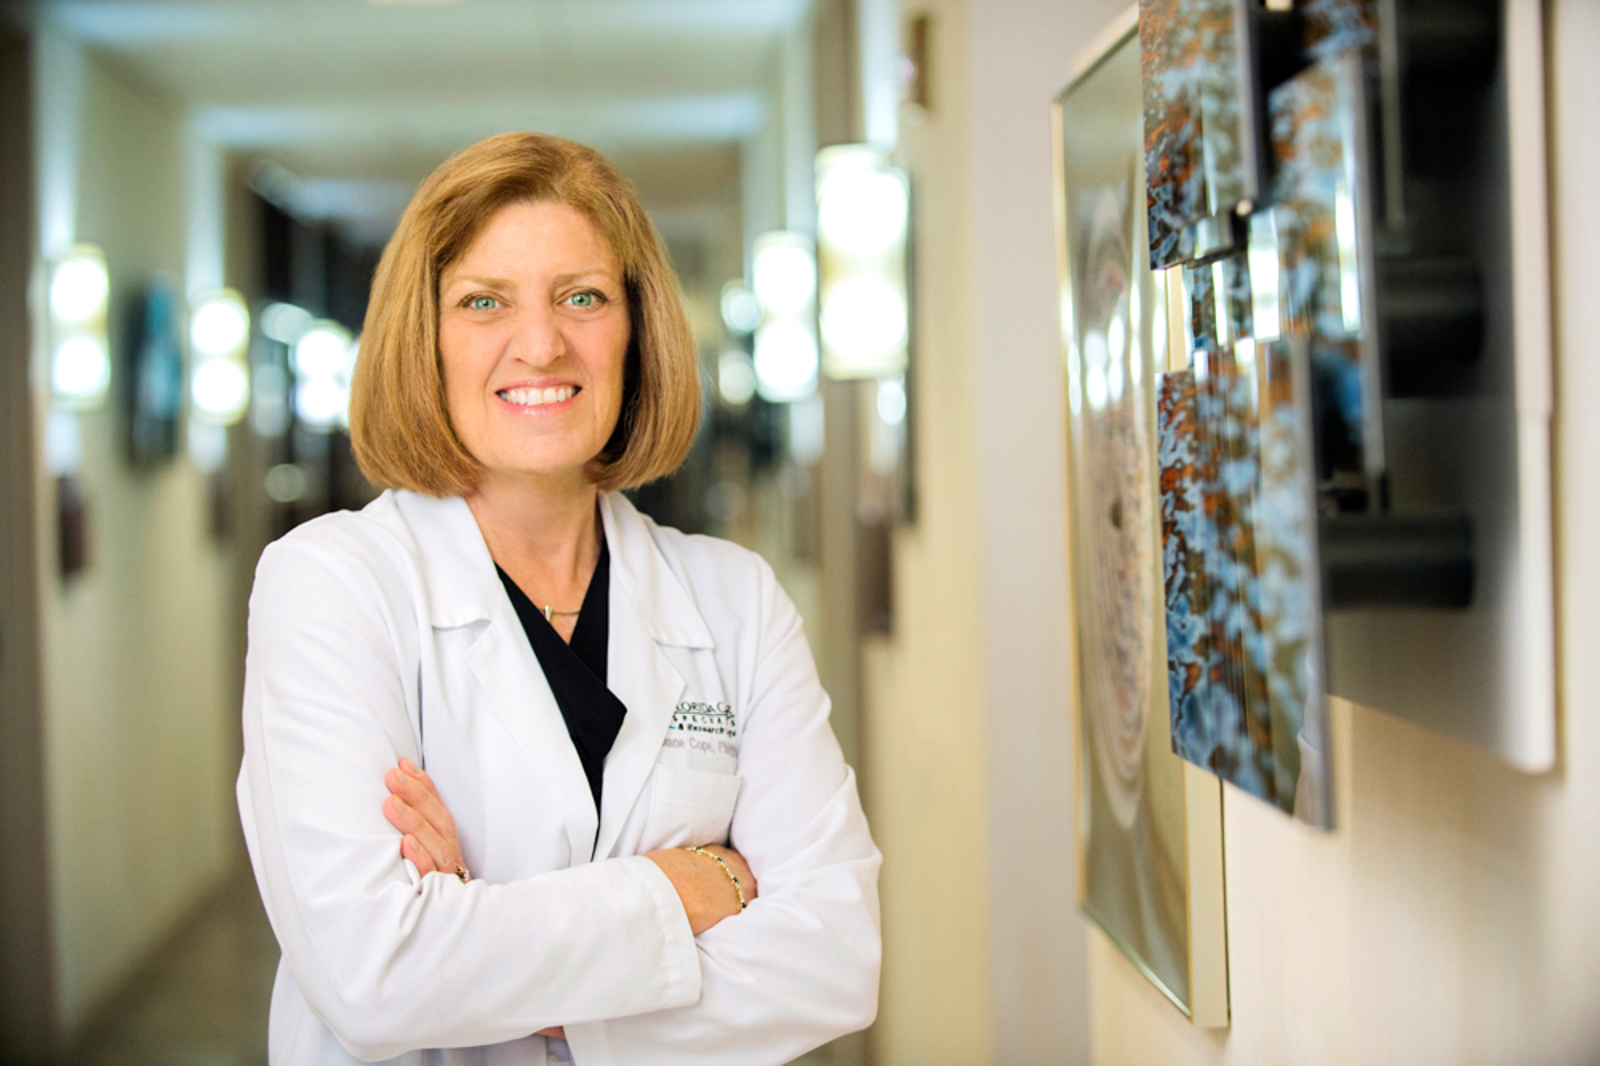 Portrait of health professional with her armed crossed smiling in hallway